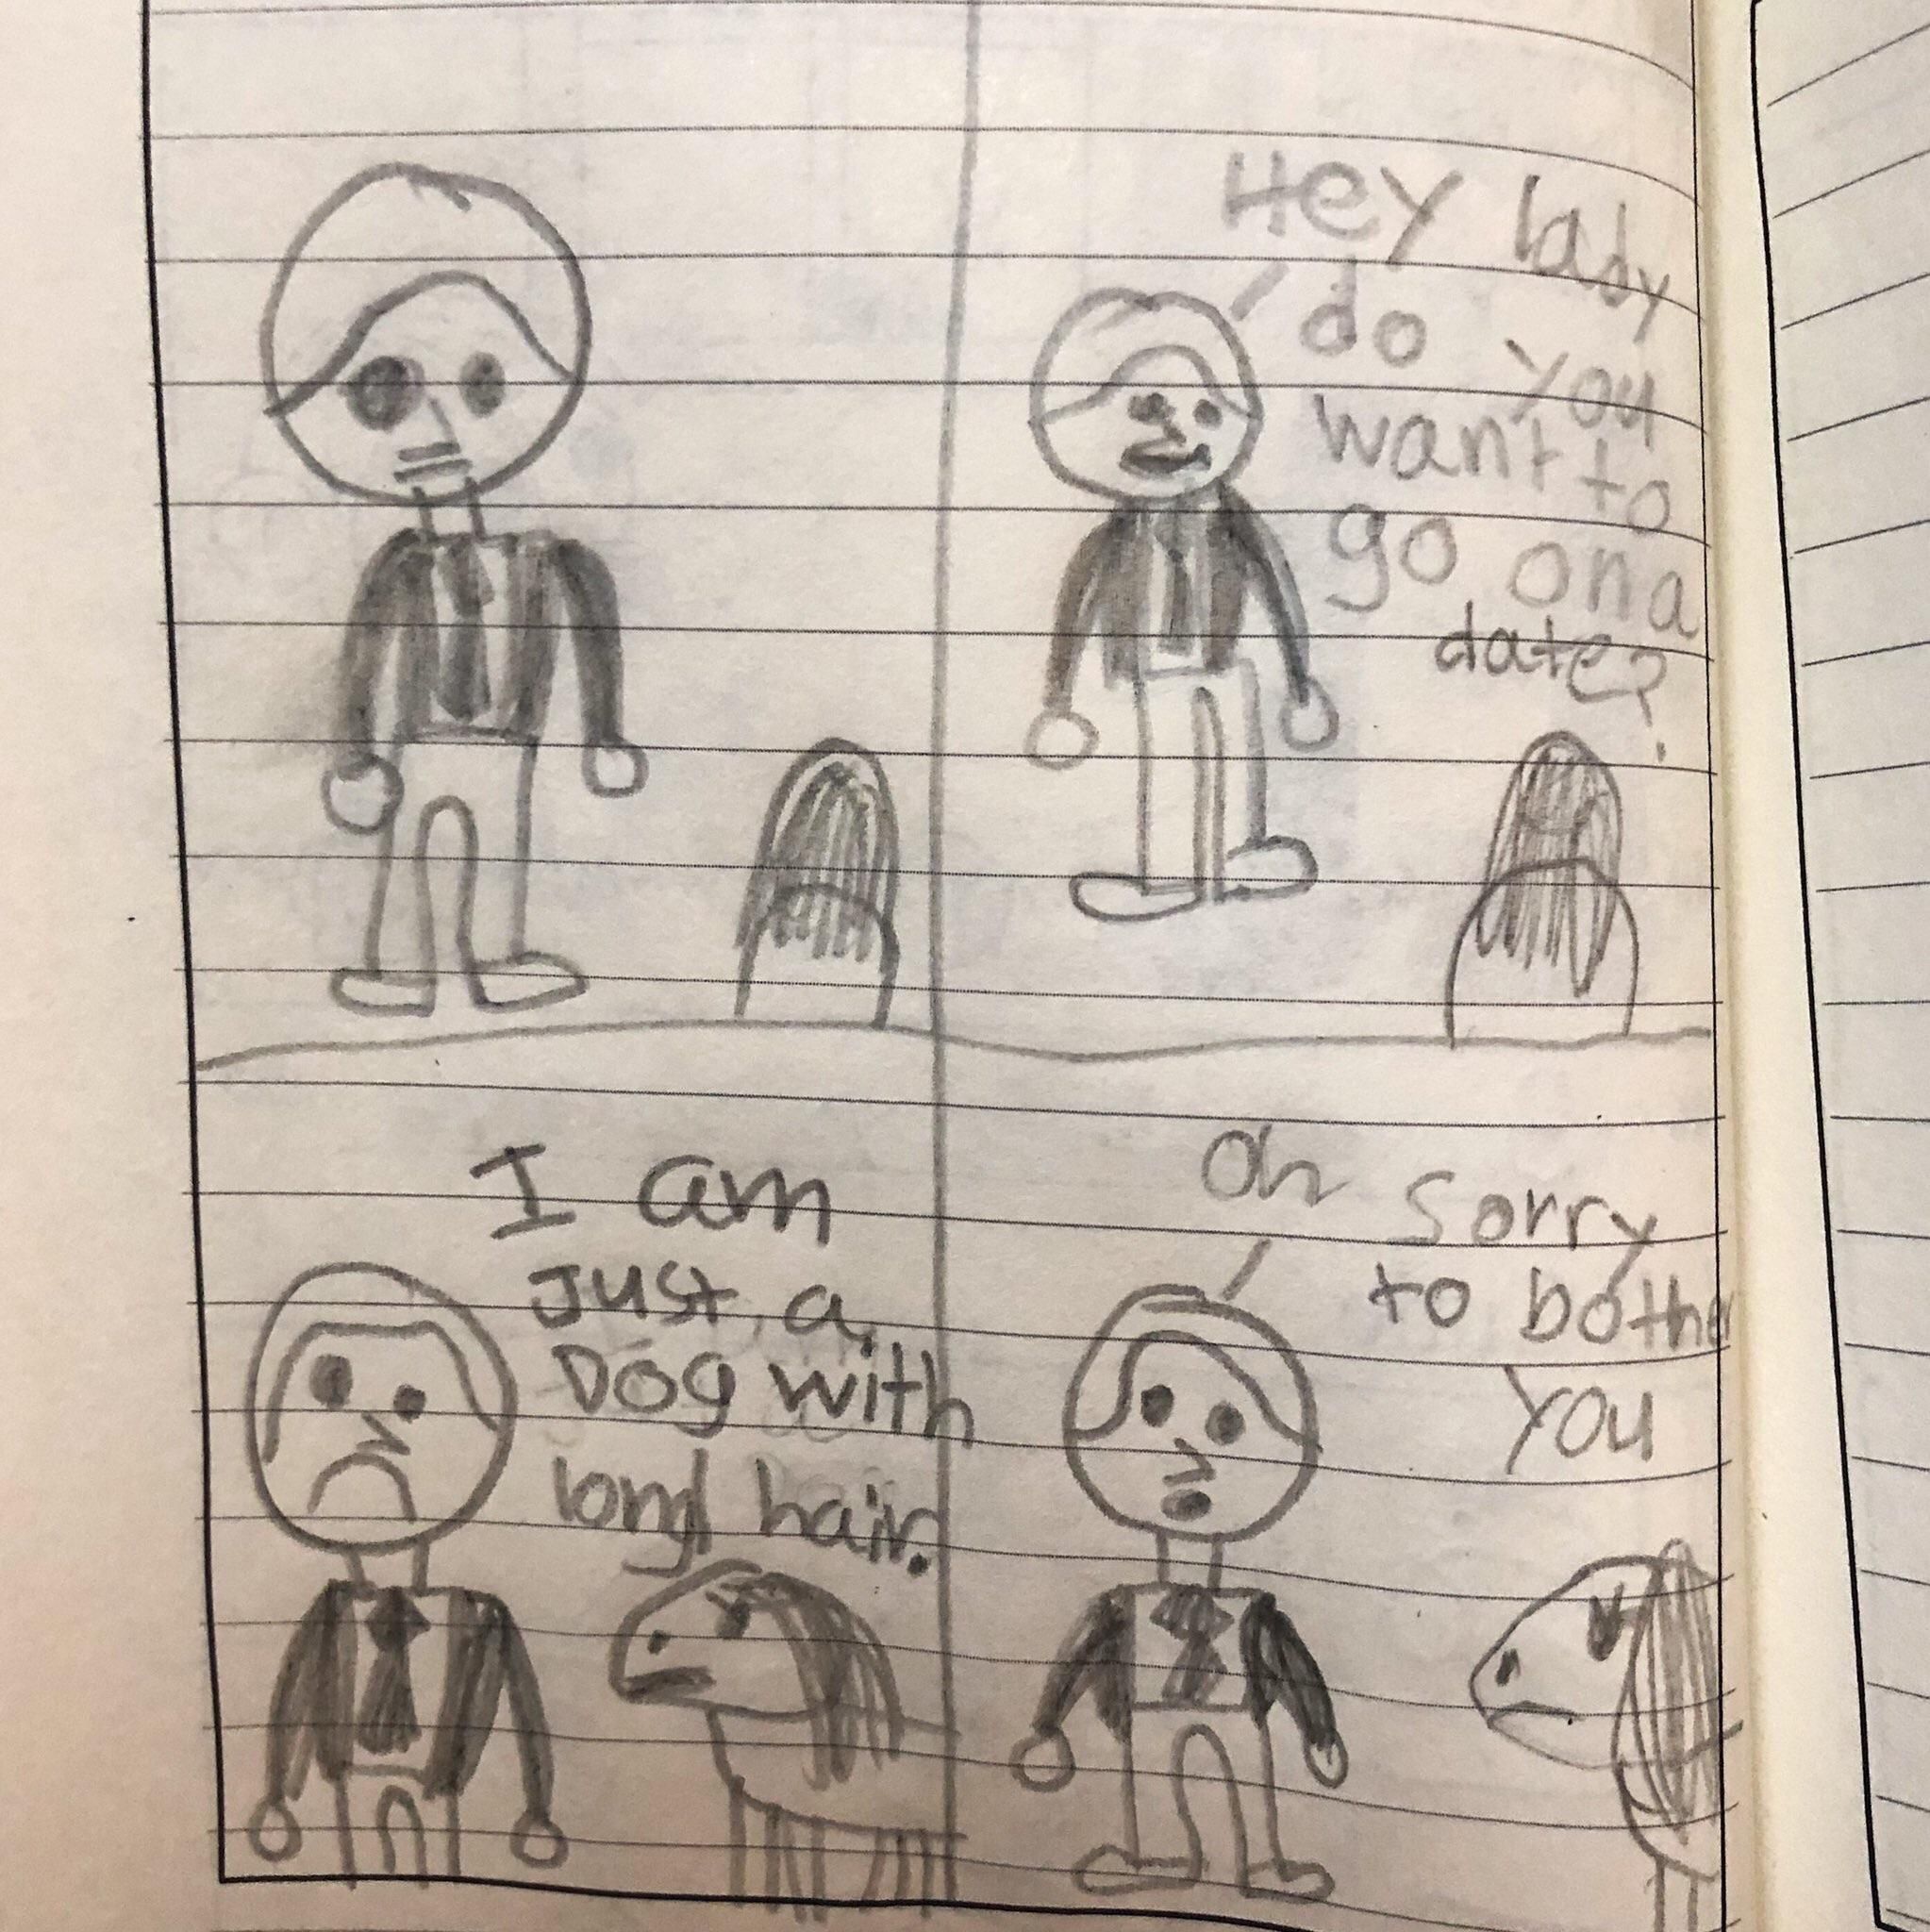 My niece drew this comic and I can’t stop laughing